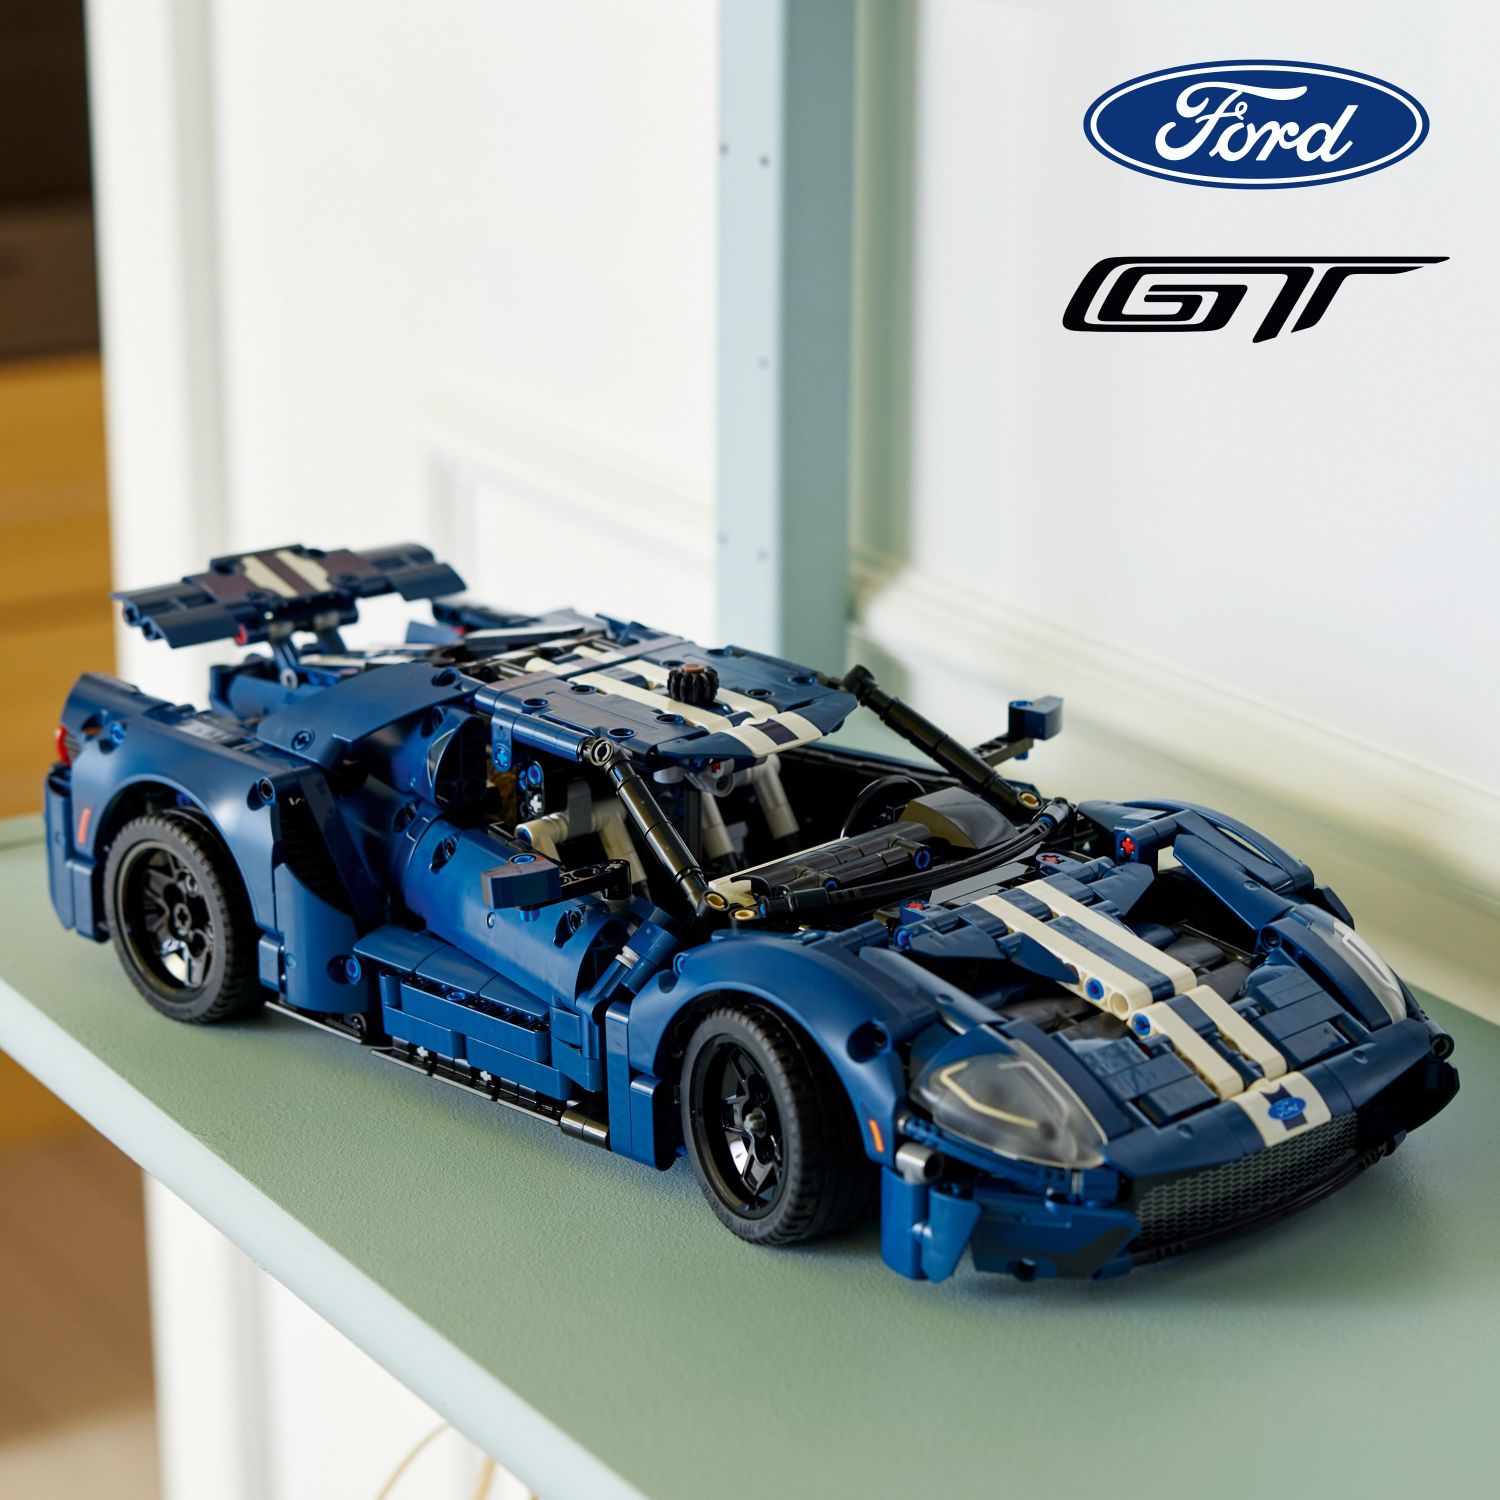 LEGO Technic 2022 Ford GT 42154 - Best